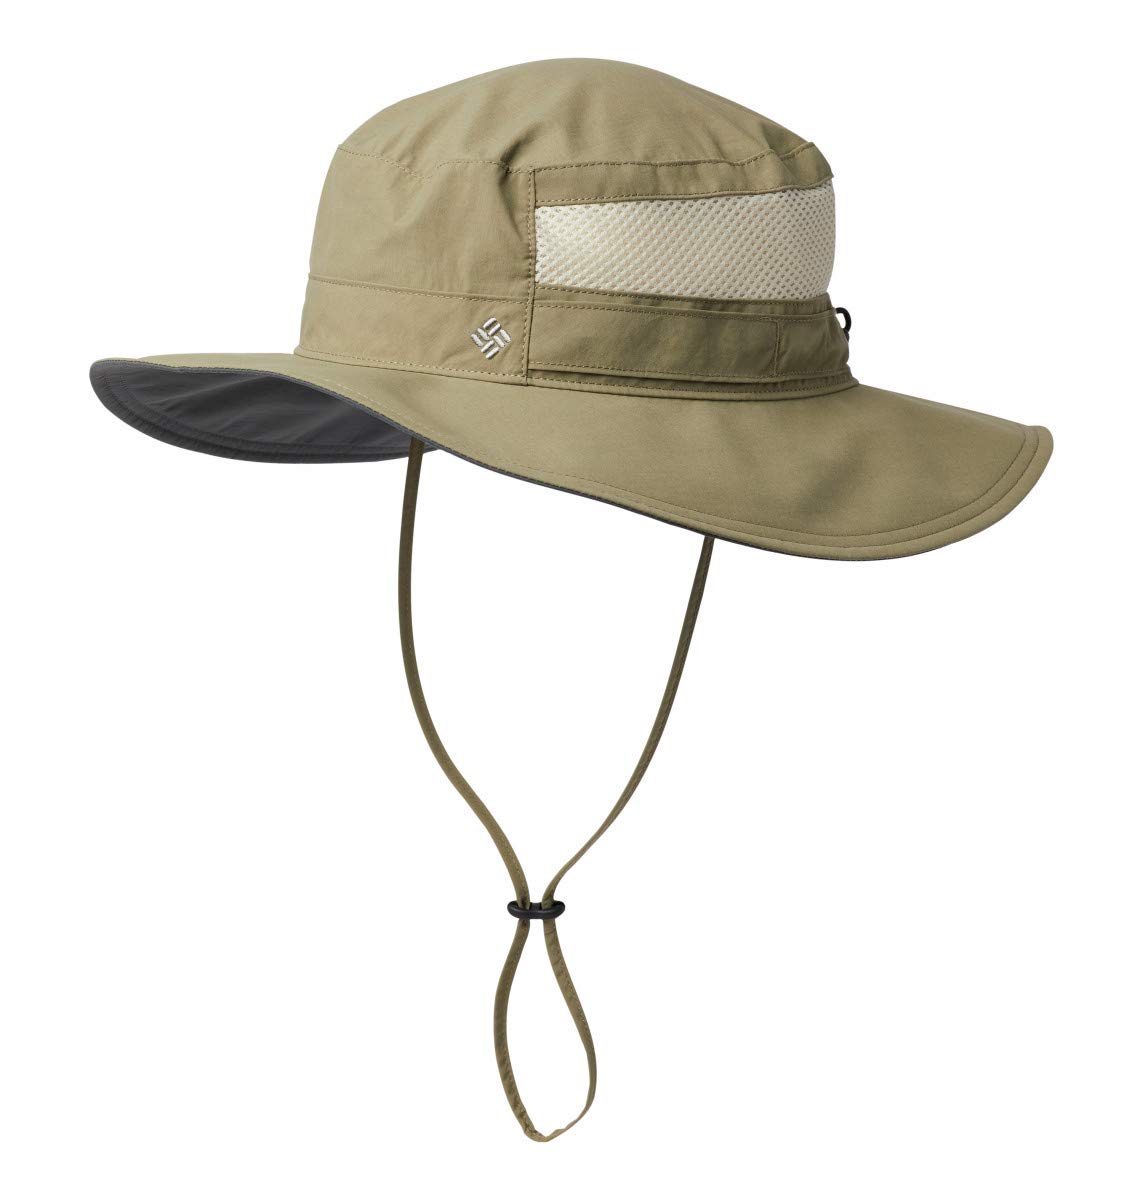 7 Best Fishing Hats Buying Guide